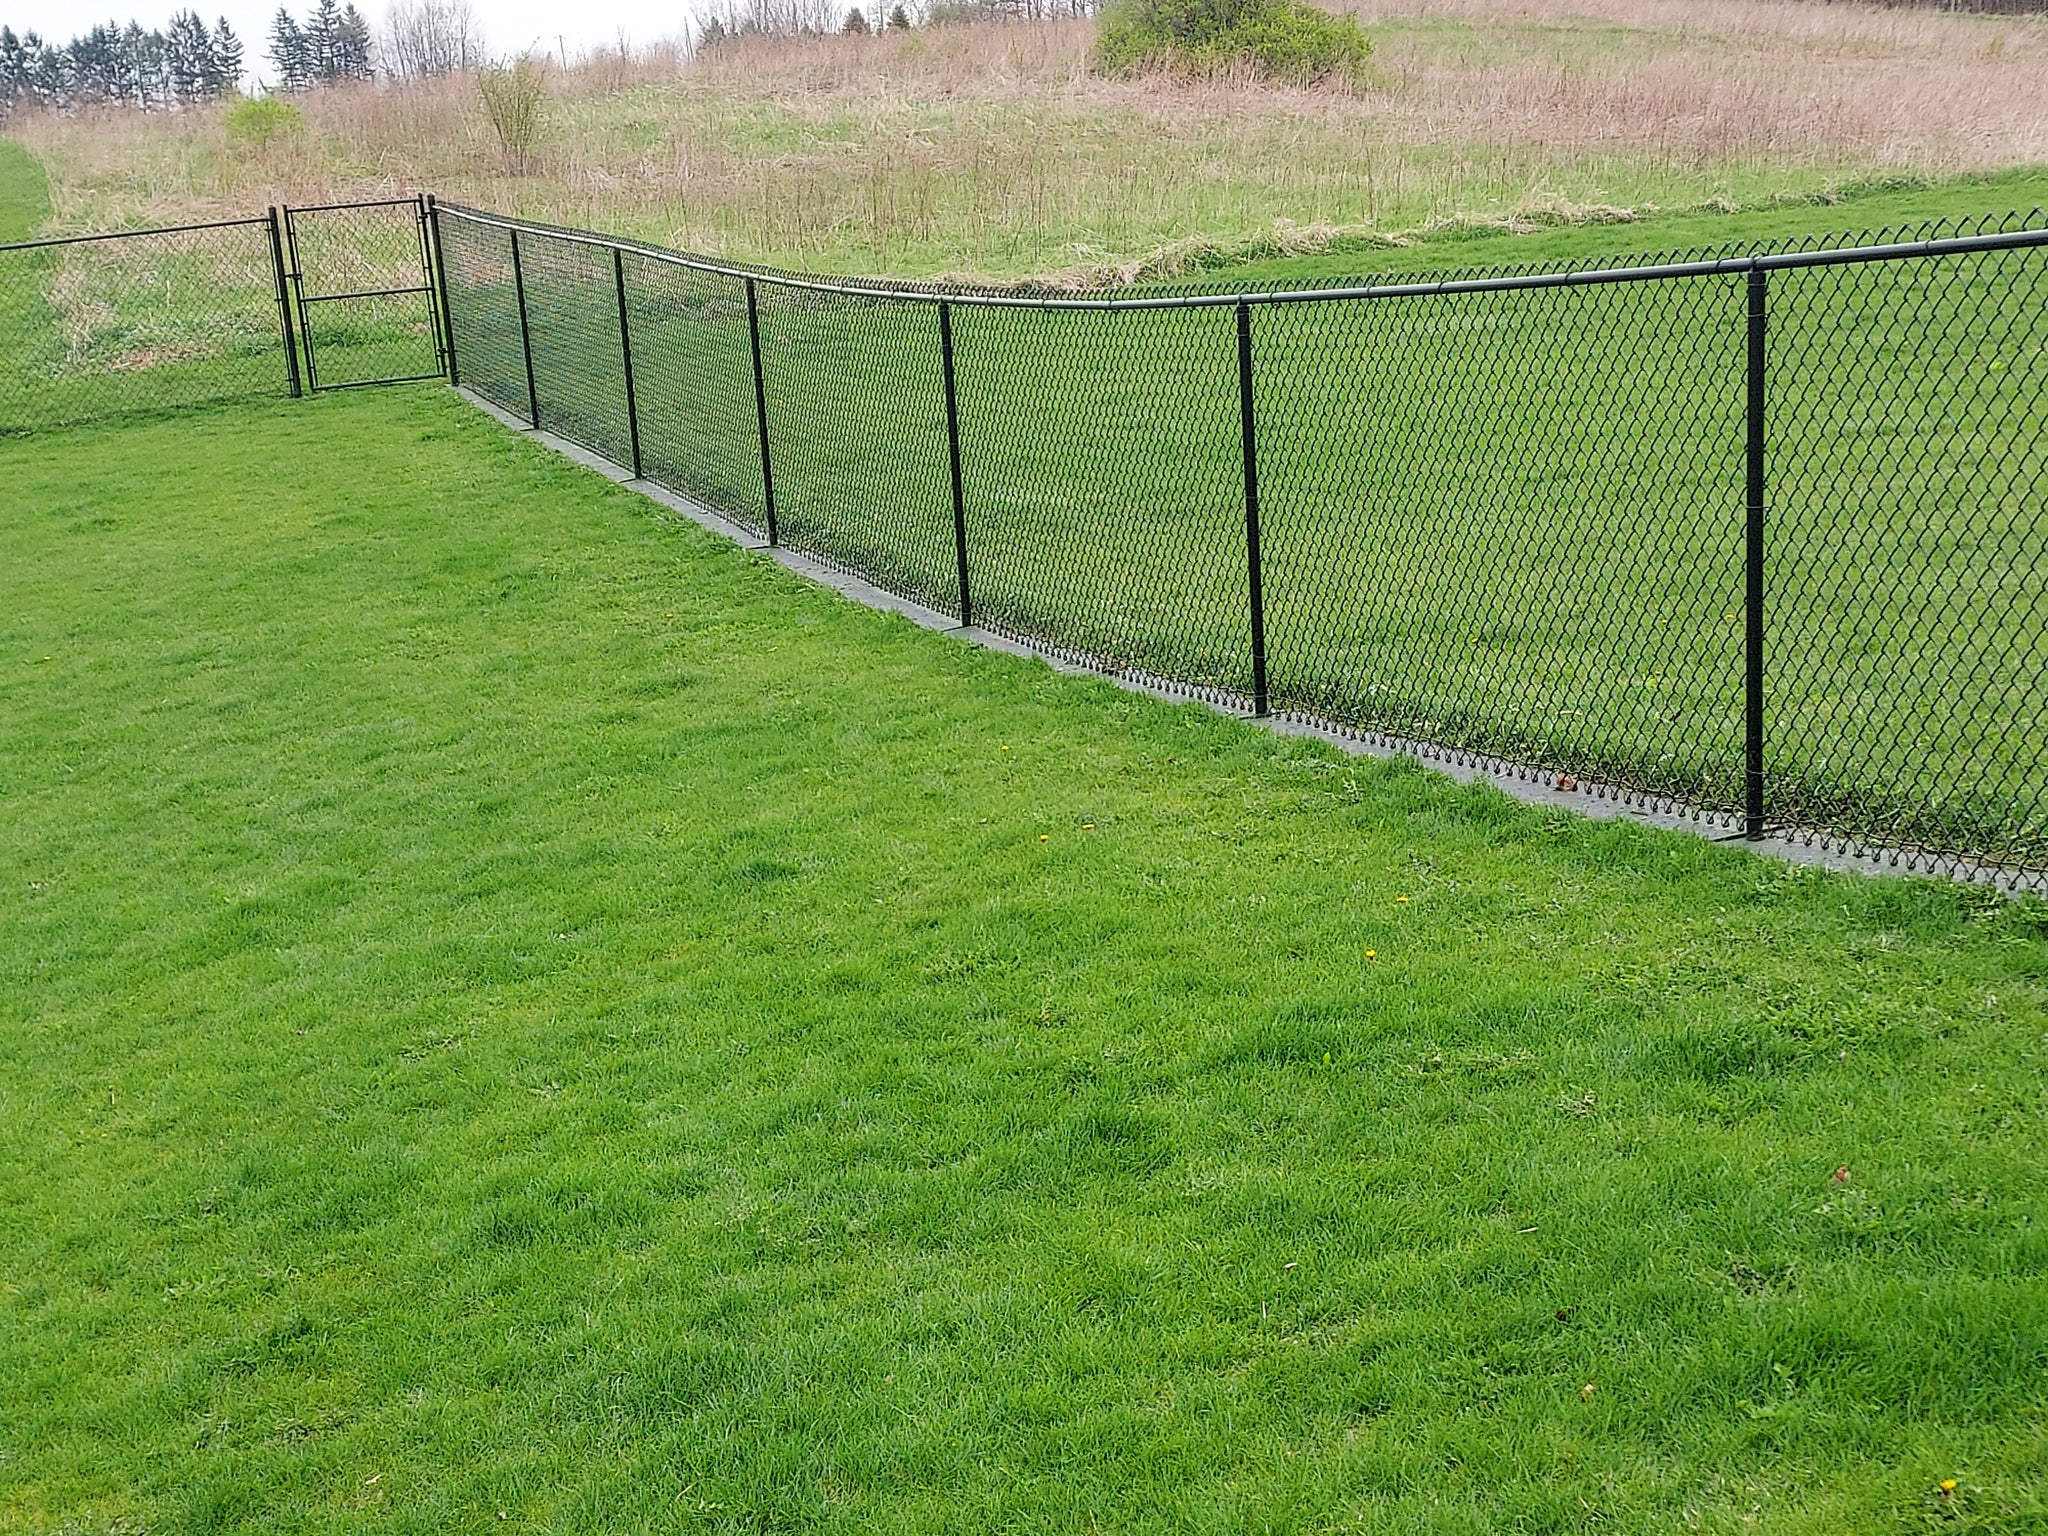 Grass Barrier Use Case: Preventing Weed Growth Under Fences